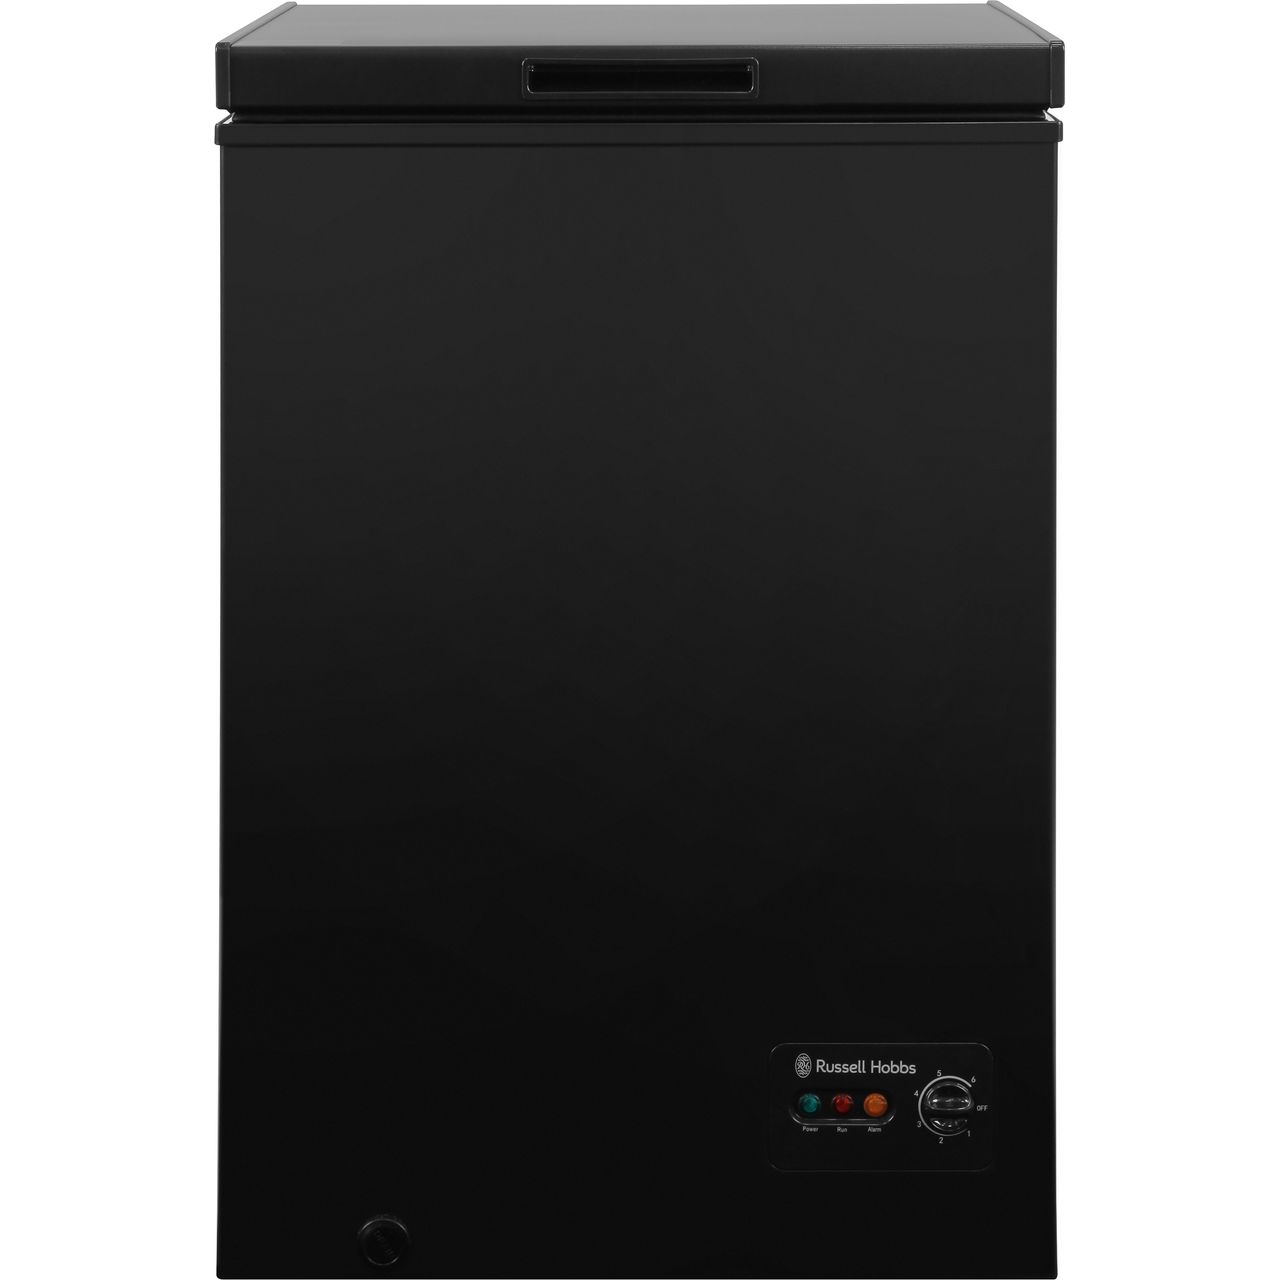 Russell Hobbs RHCF99B Chest Freezer Review